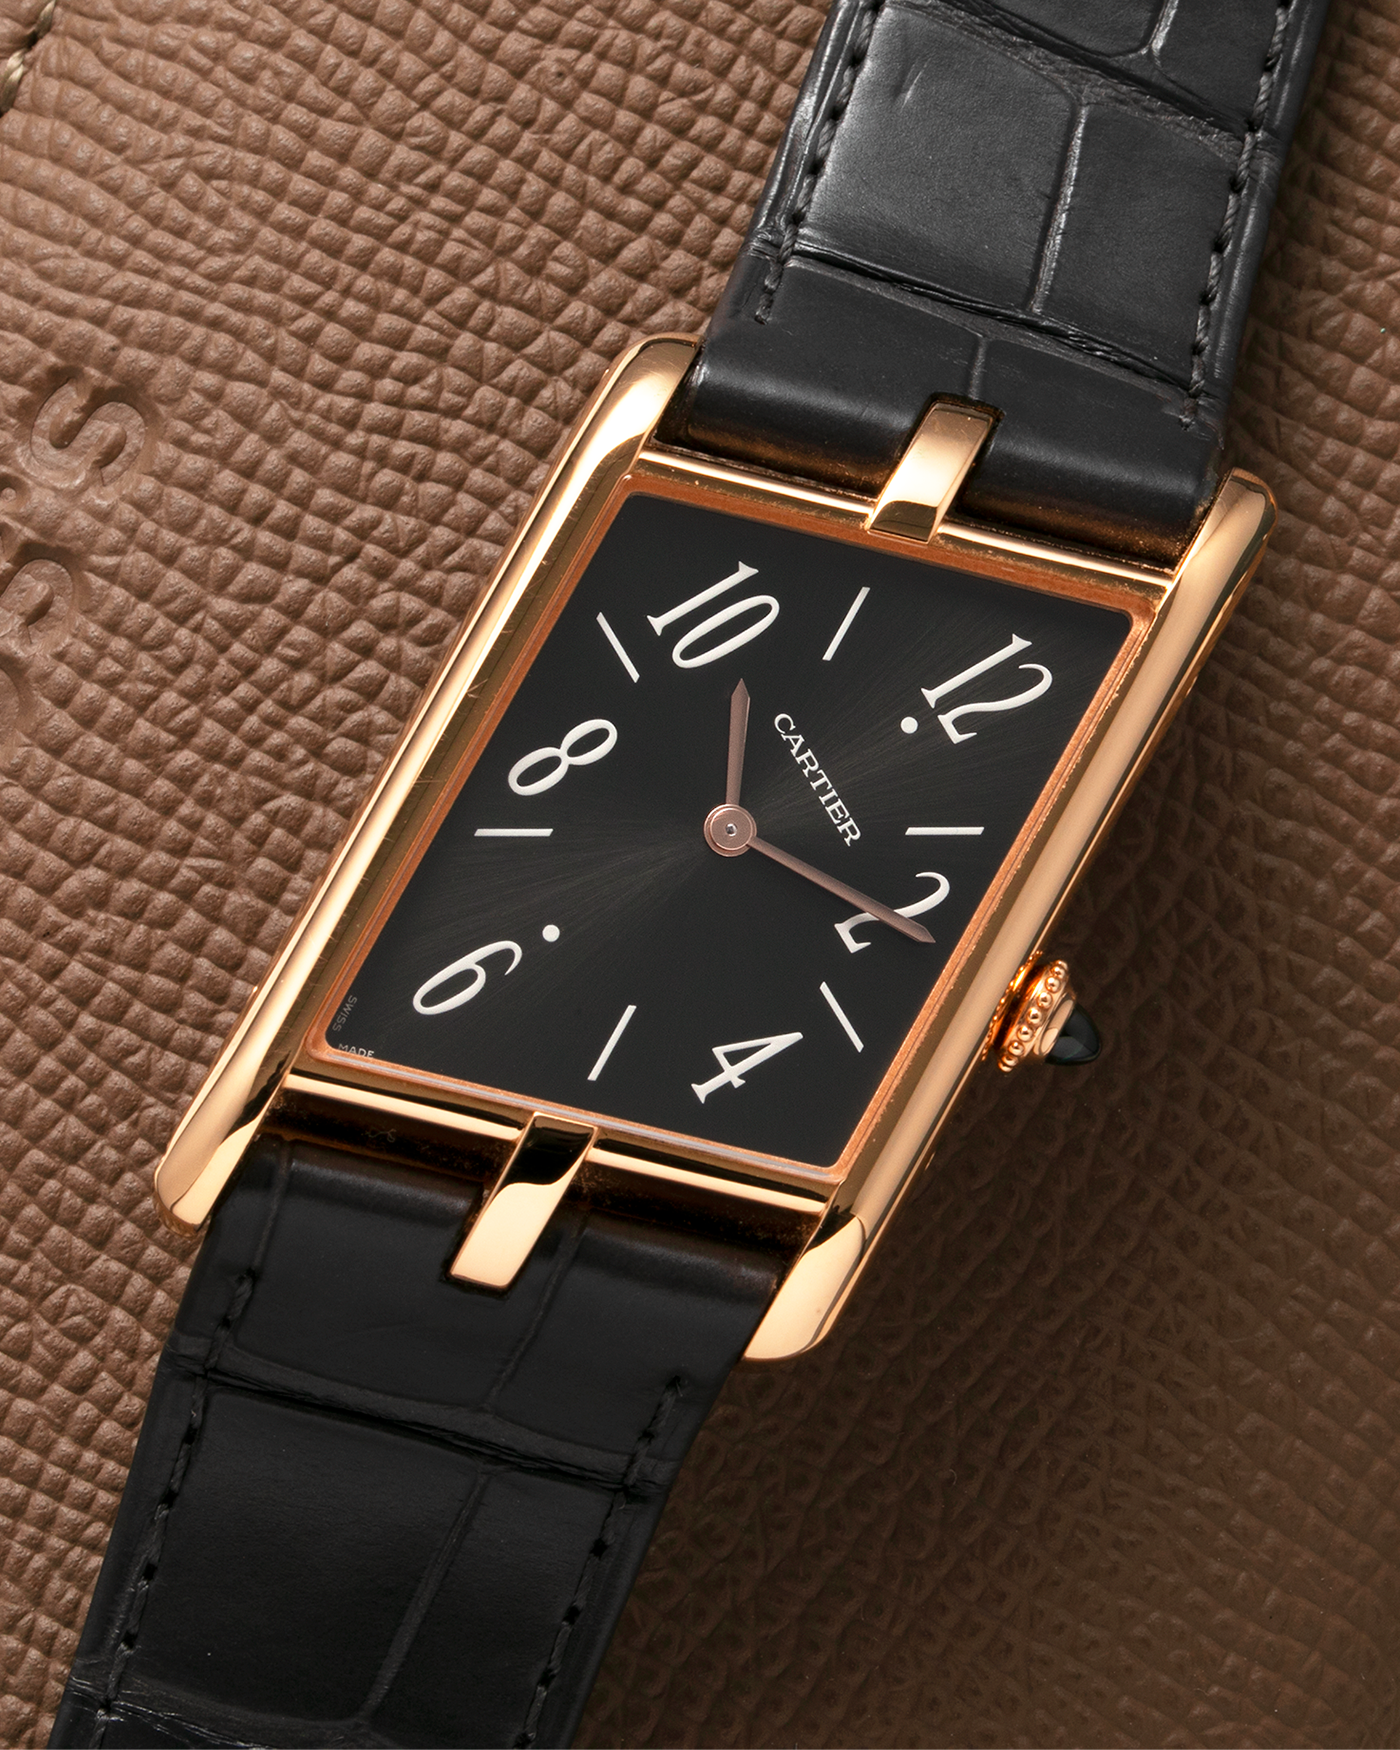 Brand: Cartier Year: 2022 Model: Privé Tank Asymétrique Reference: WGTA0043 Material: 18-carat Red Gold Movement: Cal. 1917MC, Manual-Winding Case Diameter: 47.15mm x 26.2mm x 6.38mm Strap: Cartier Grey Alligator Leather Strap with Signed 18-carat Red Gold Tang Buckle